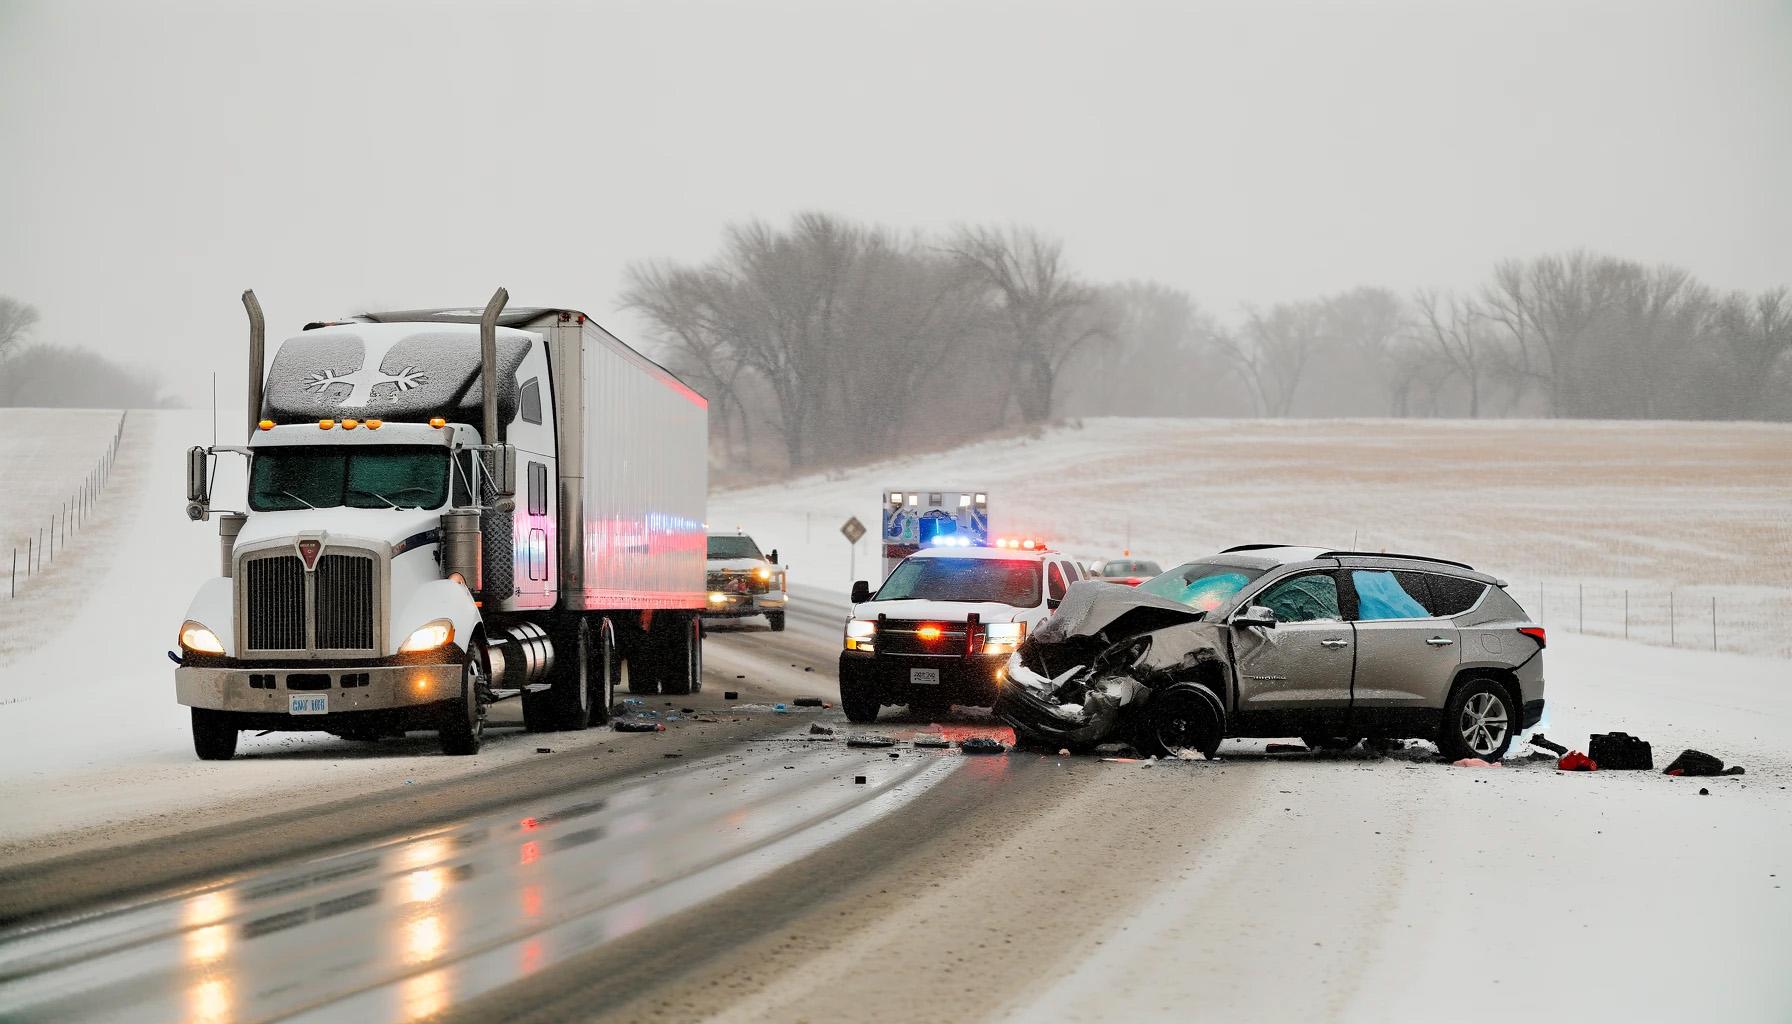 SUV and BIG rig crash on snowy road accident news graphic